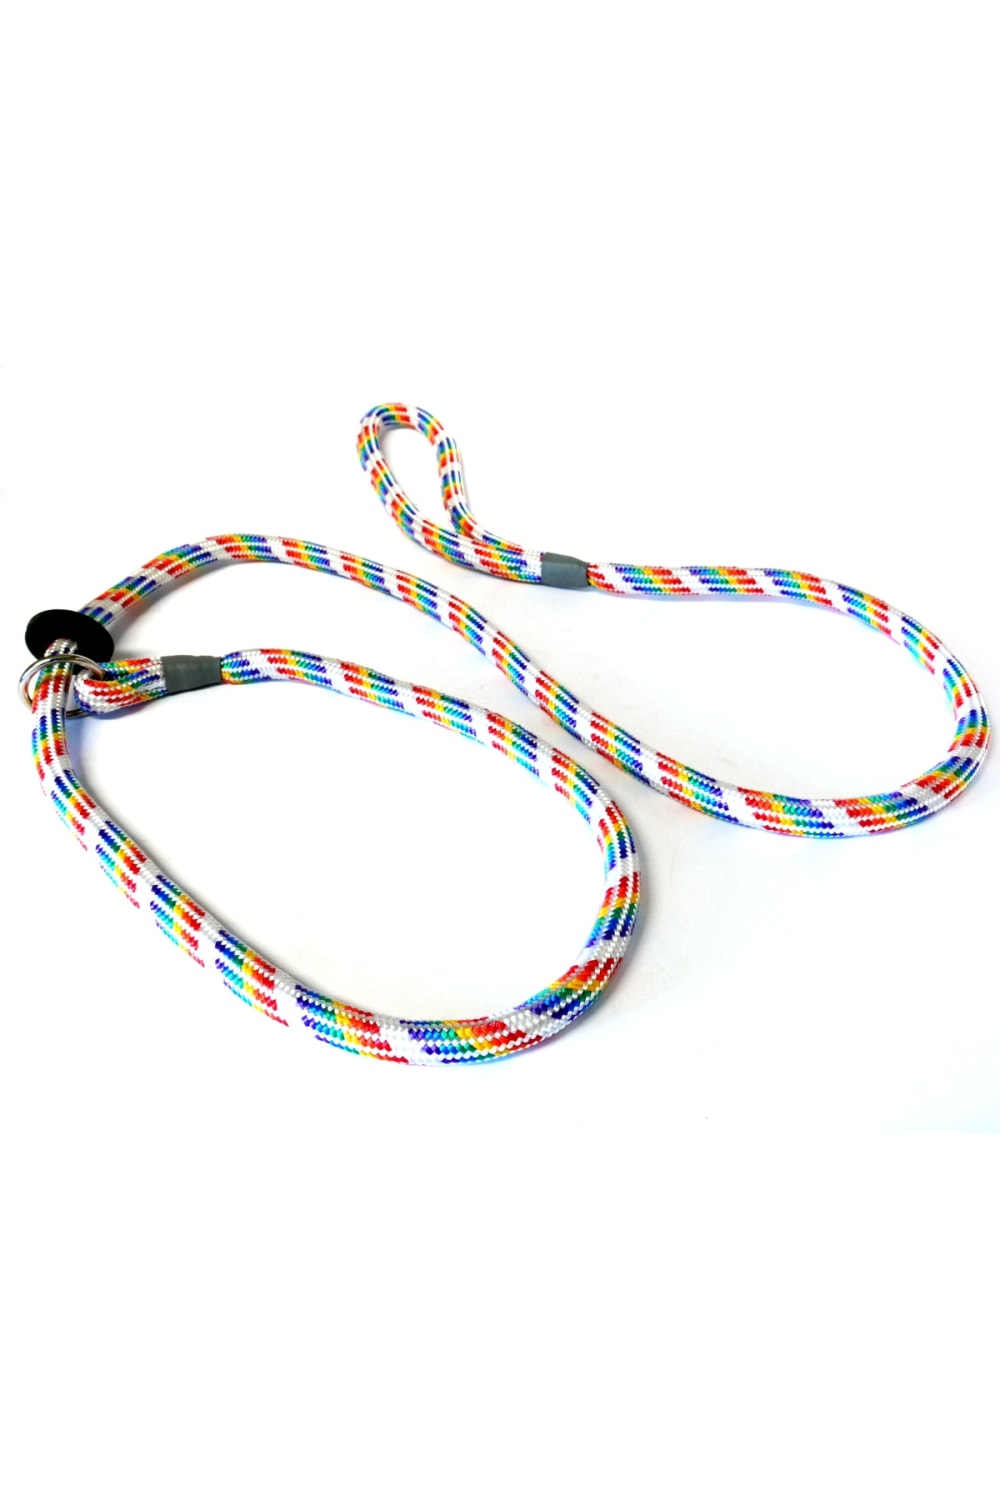 KJK Ropeworks Braided Slip Leash With Rubber Stop (Rainbow) (0.31 x 59in)